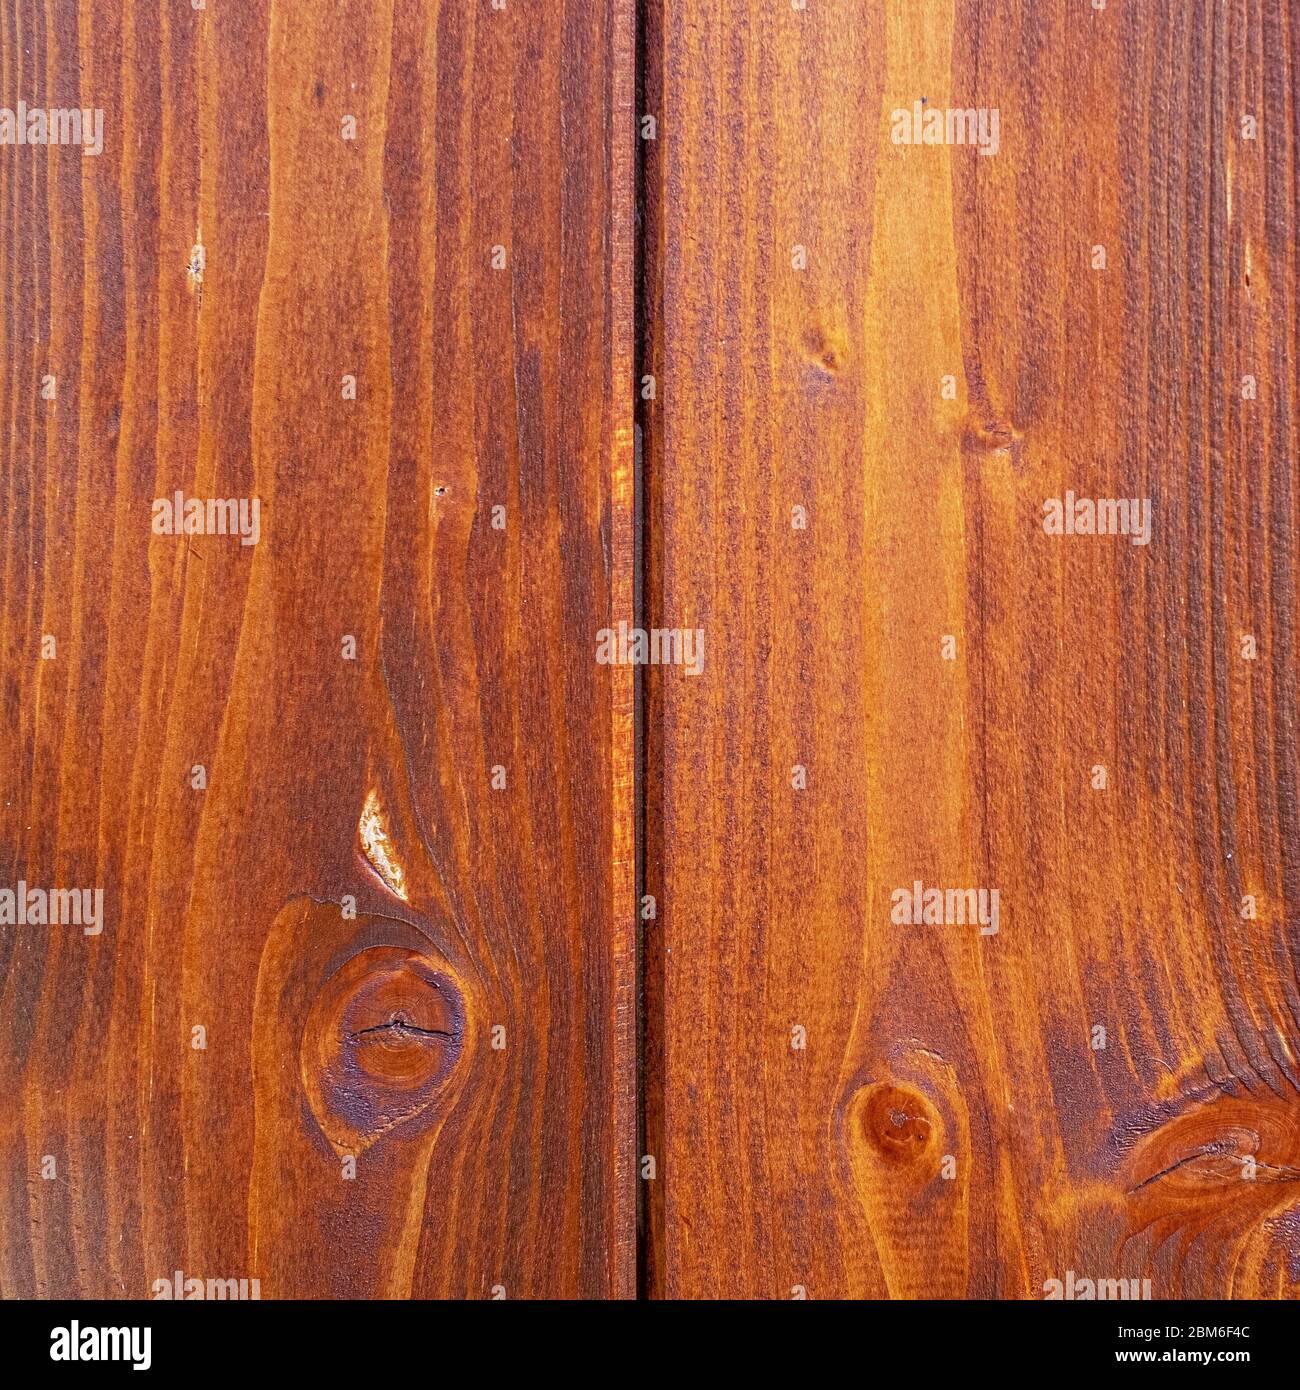 Exterior construction exterior wood boards background texture Stock Photo